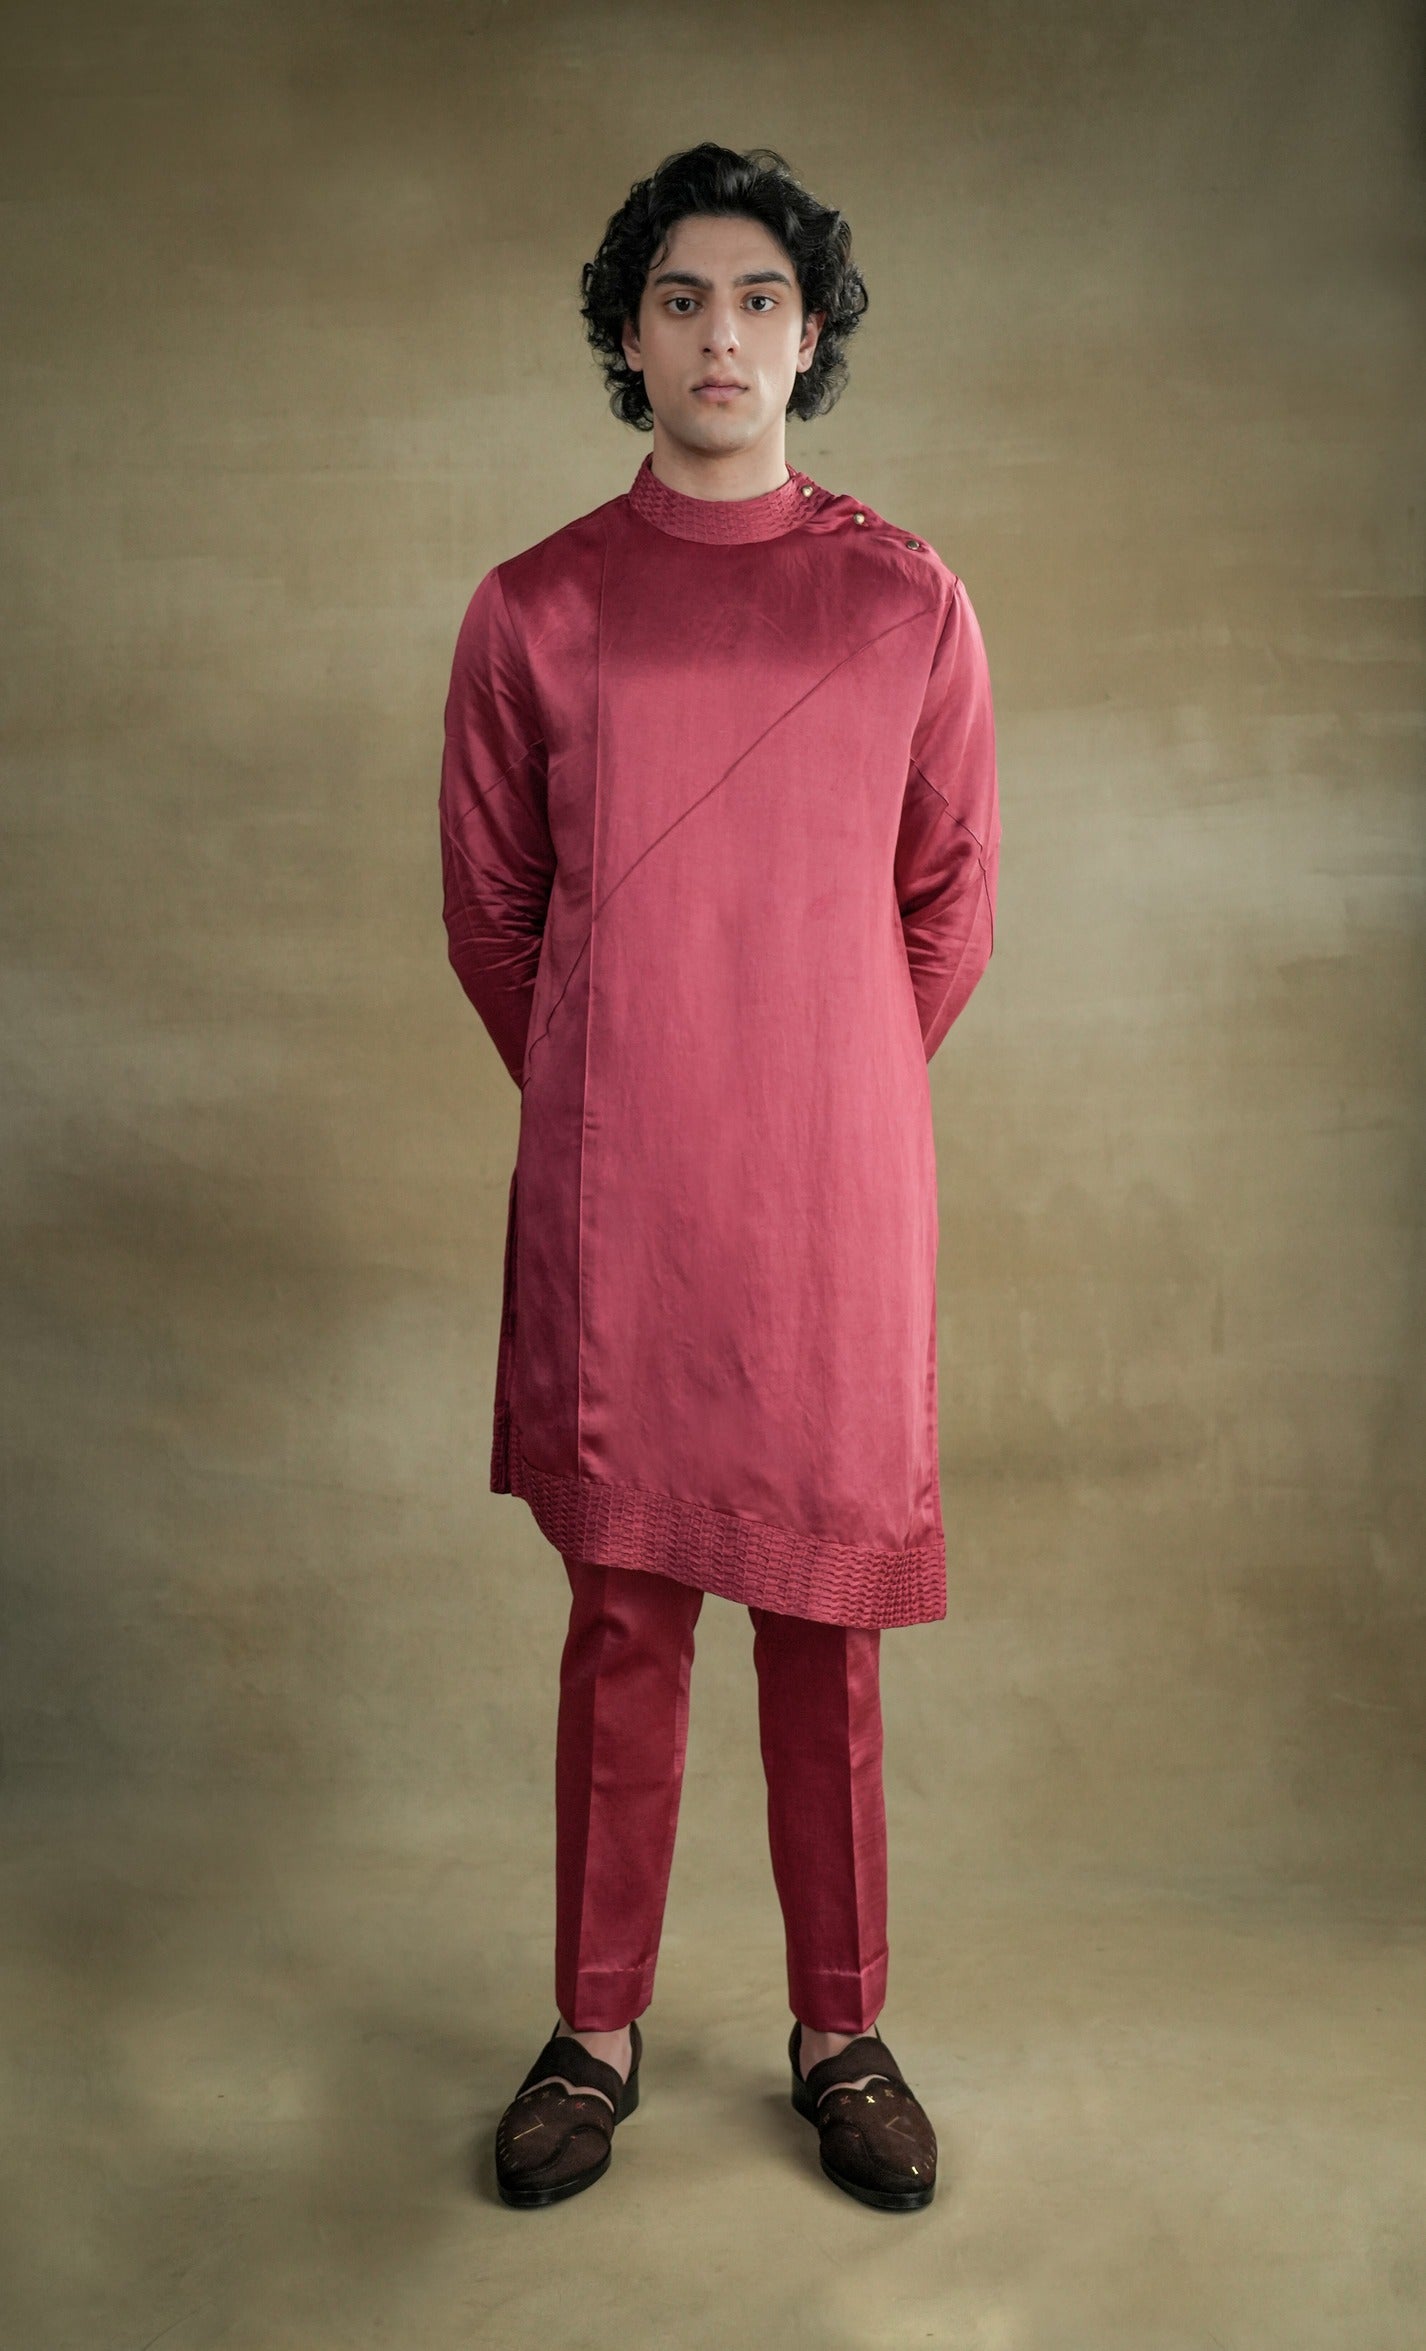 Bohemian scarlet kurta set with a relaxed-fit tunic adorned with tassels and embroidery, paired with loose-fitting trousers for a free-spirited and whimsical vibe